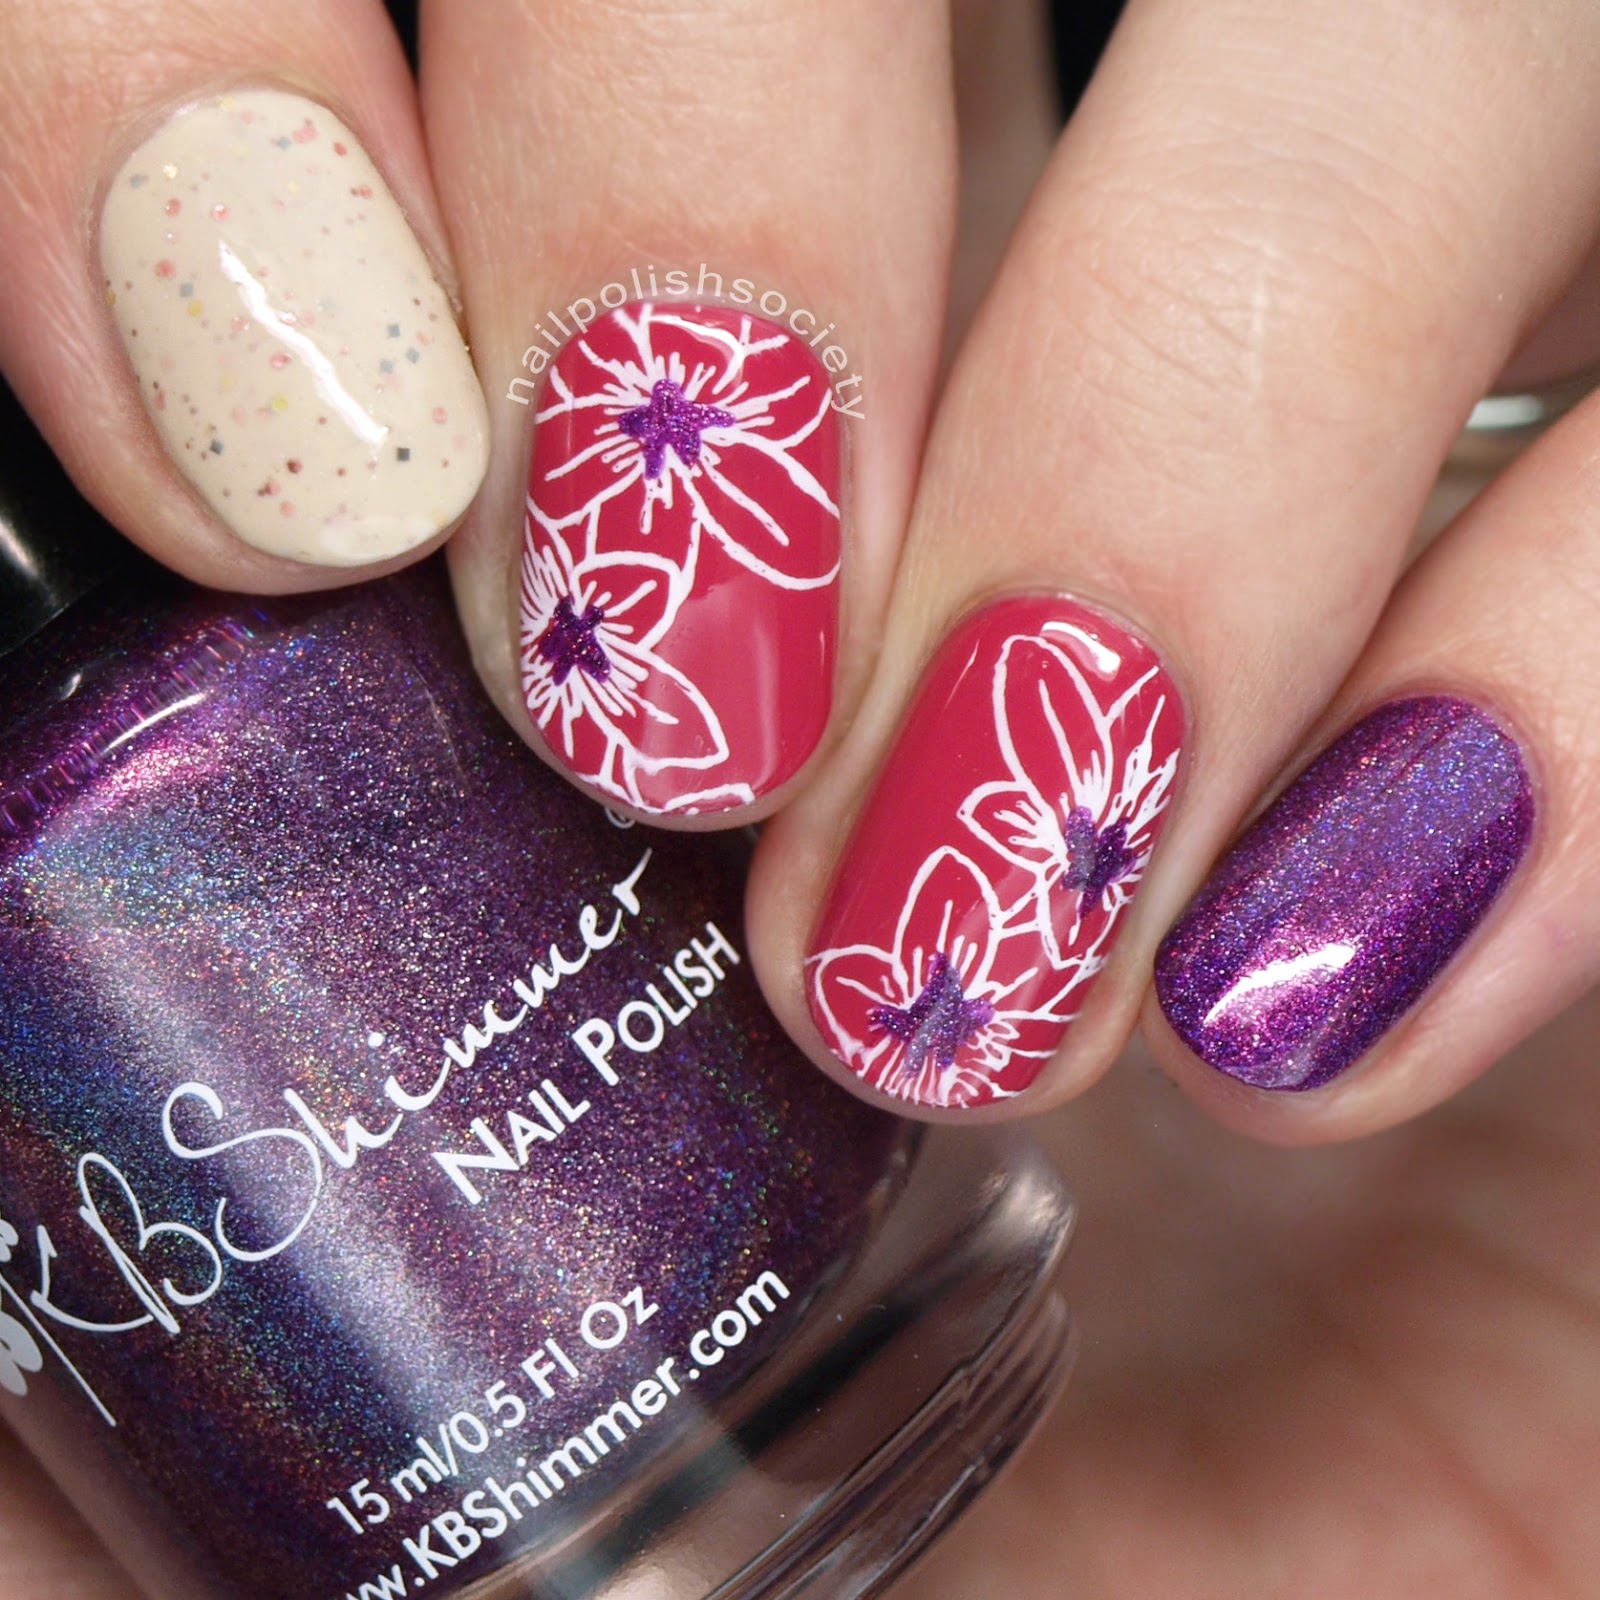 Nail Polish Society: Cici & Sisi Stamping Plates and Clear Stamper Review